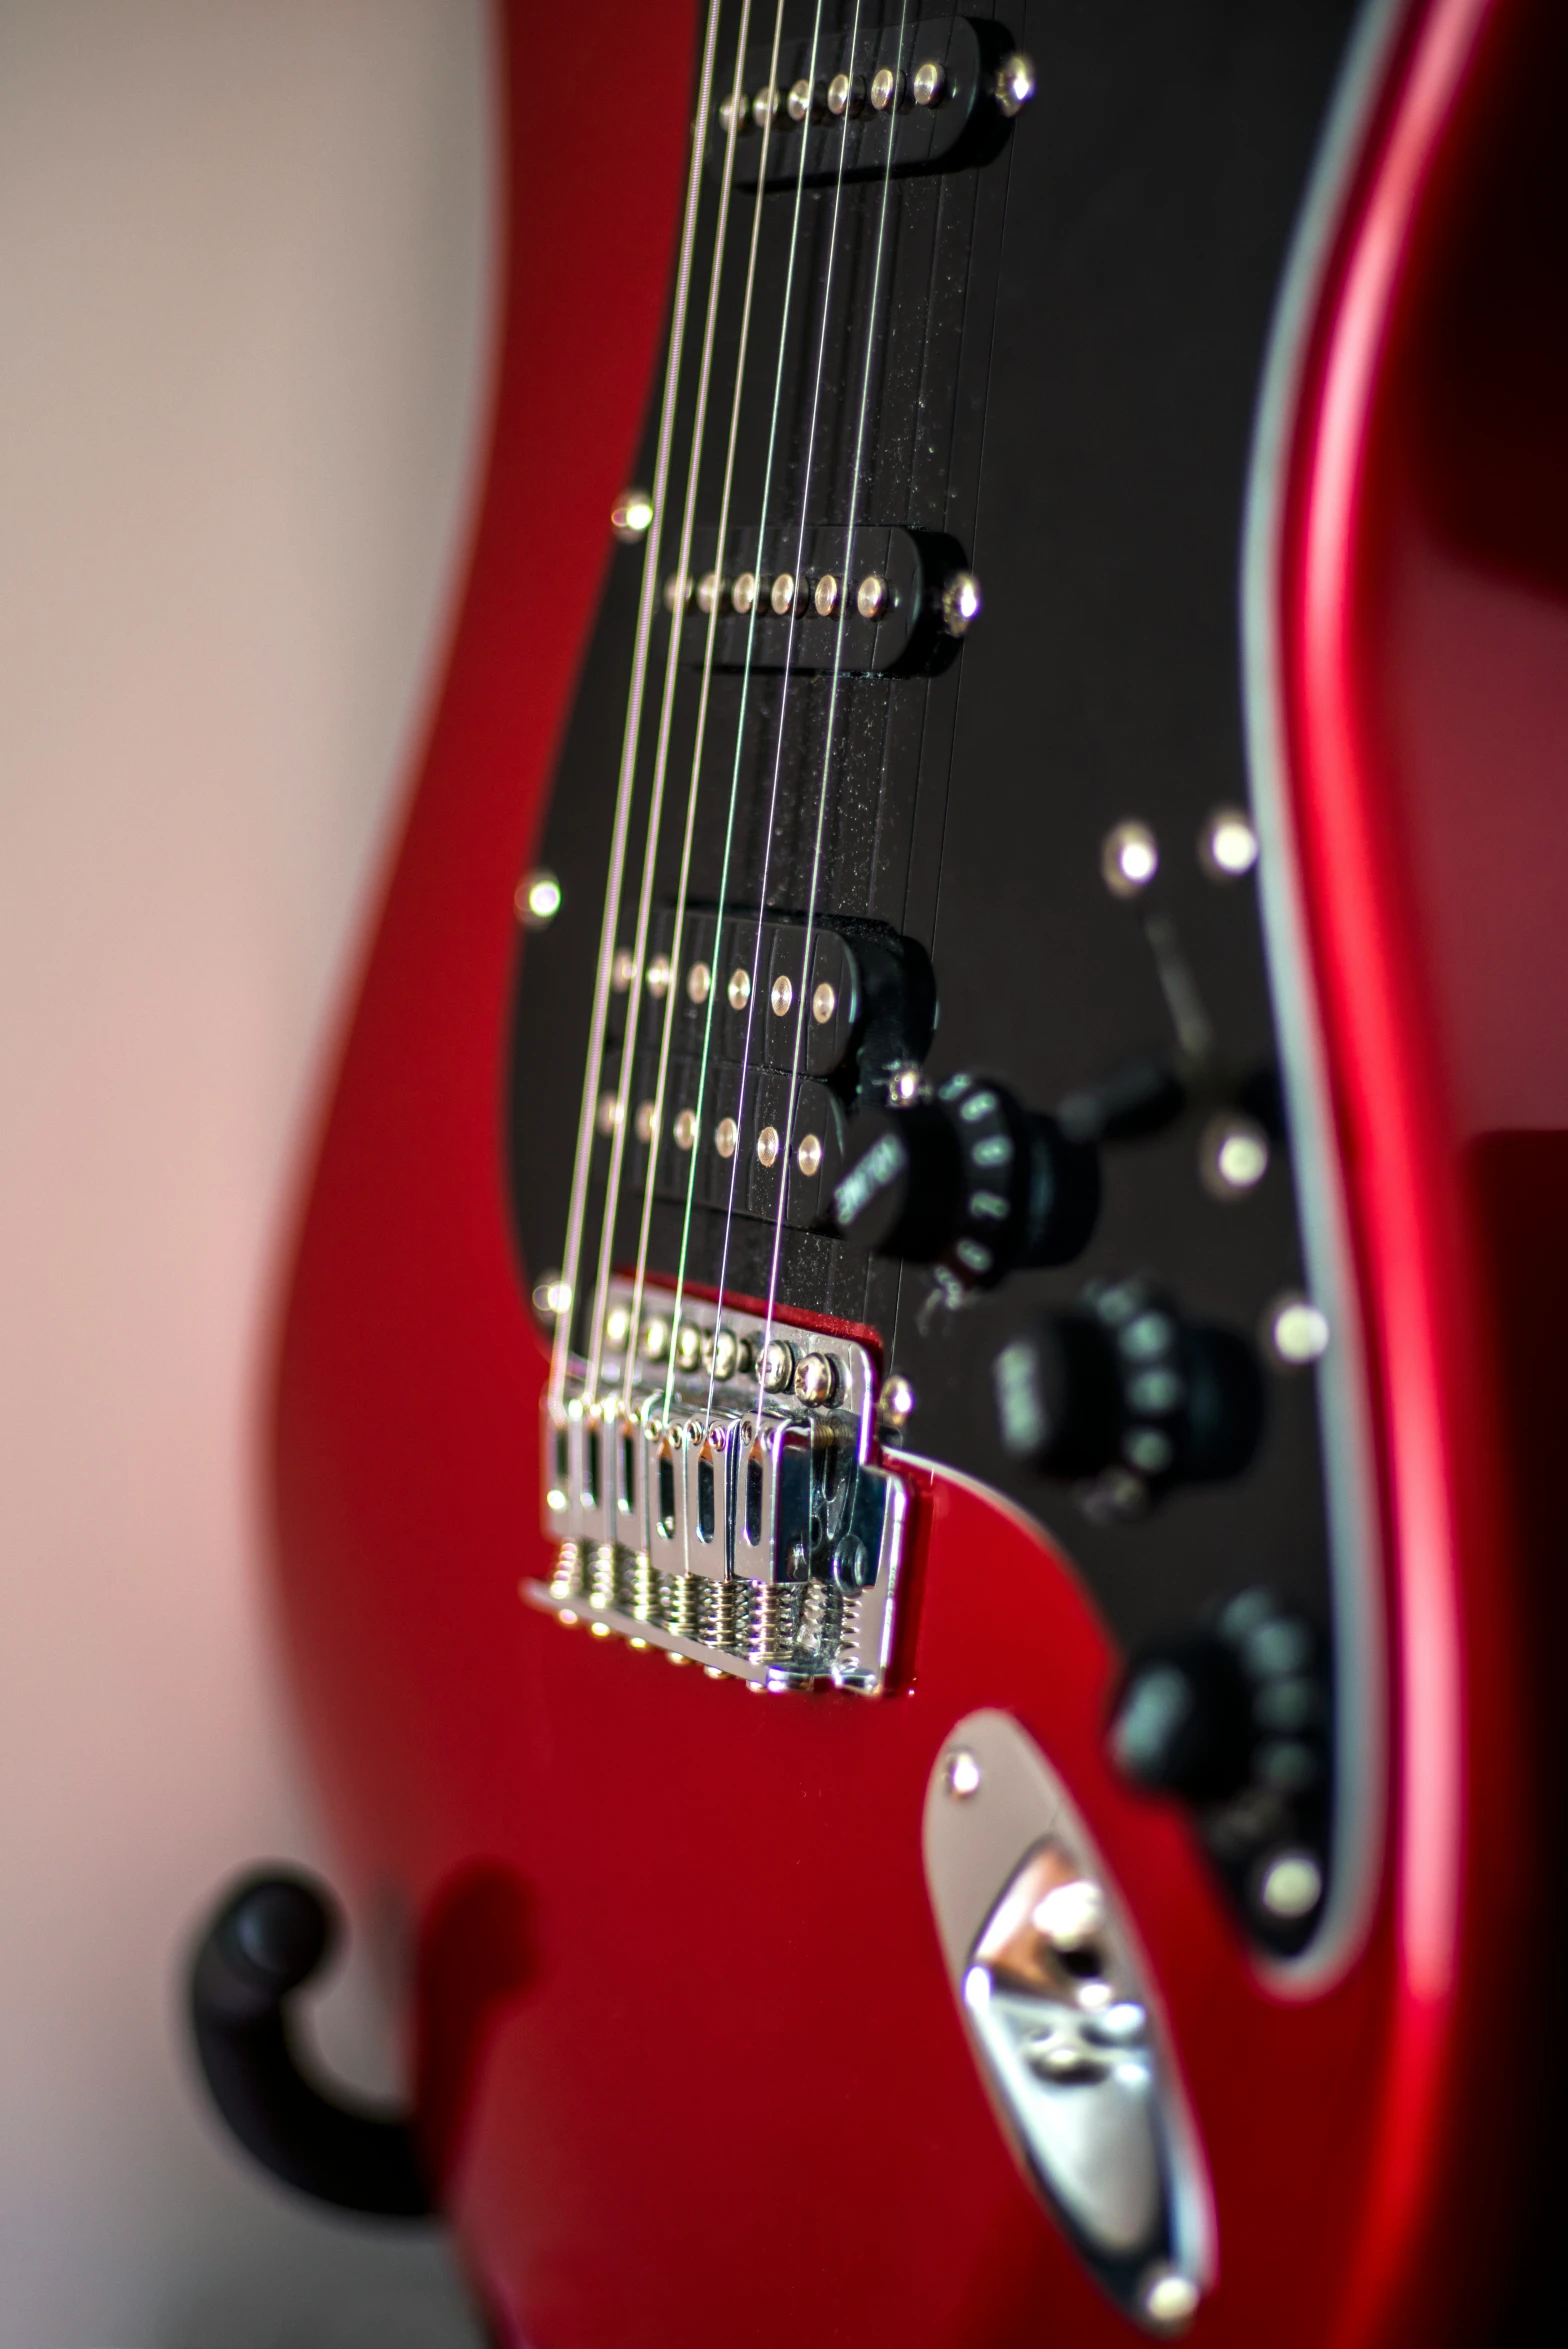 an electric guitar with black and red parts on it